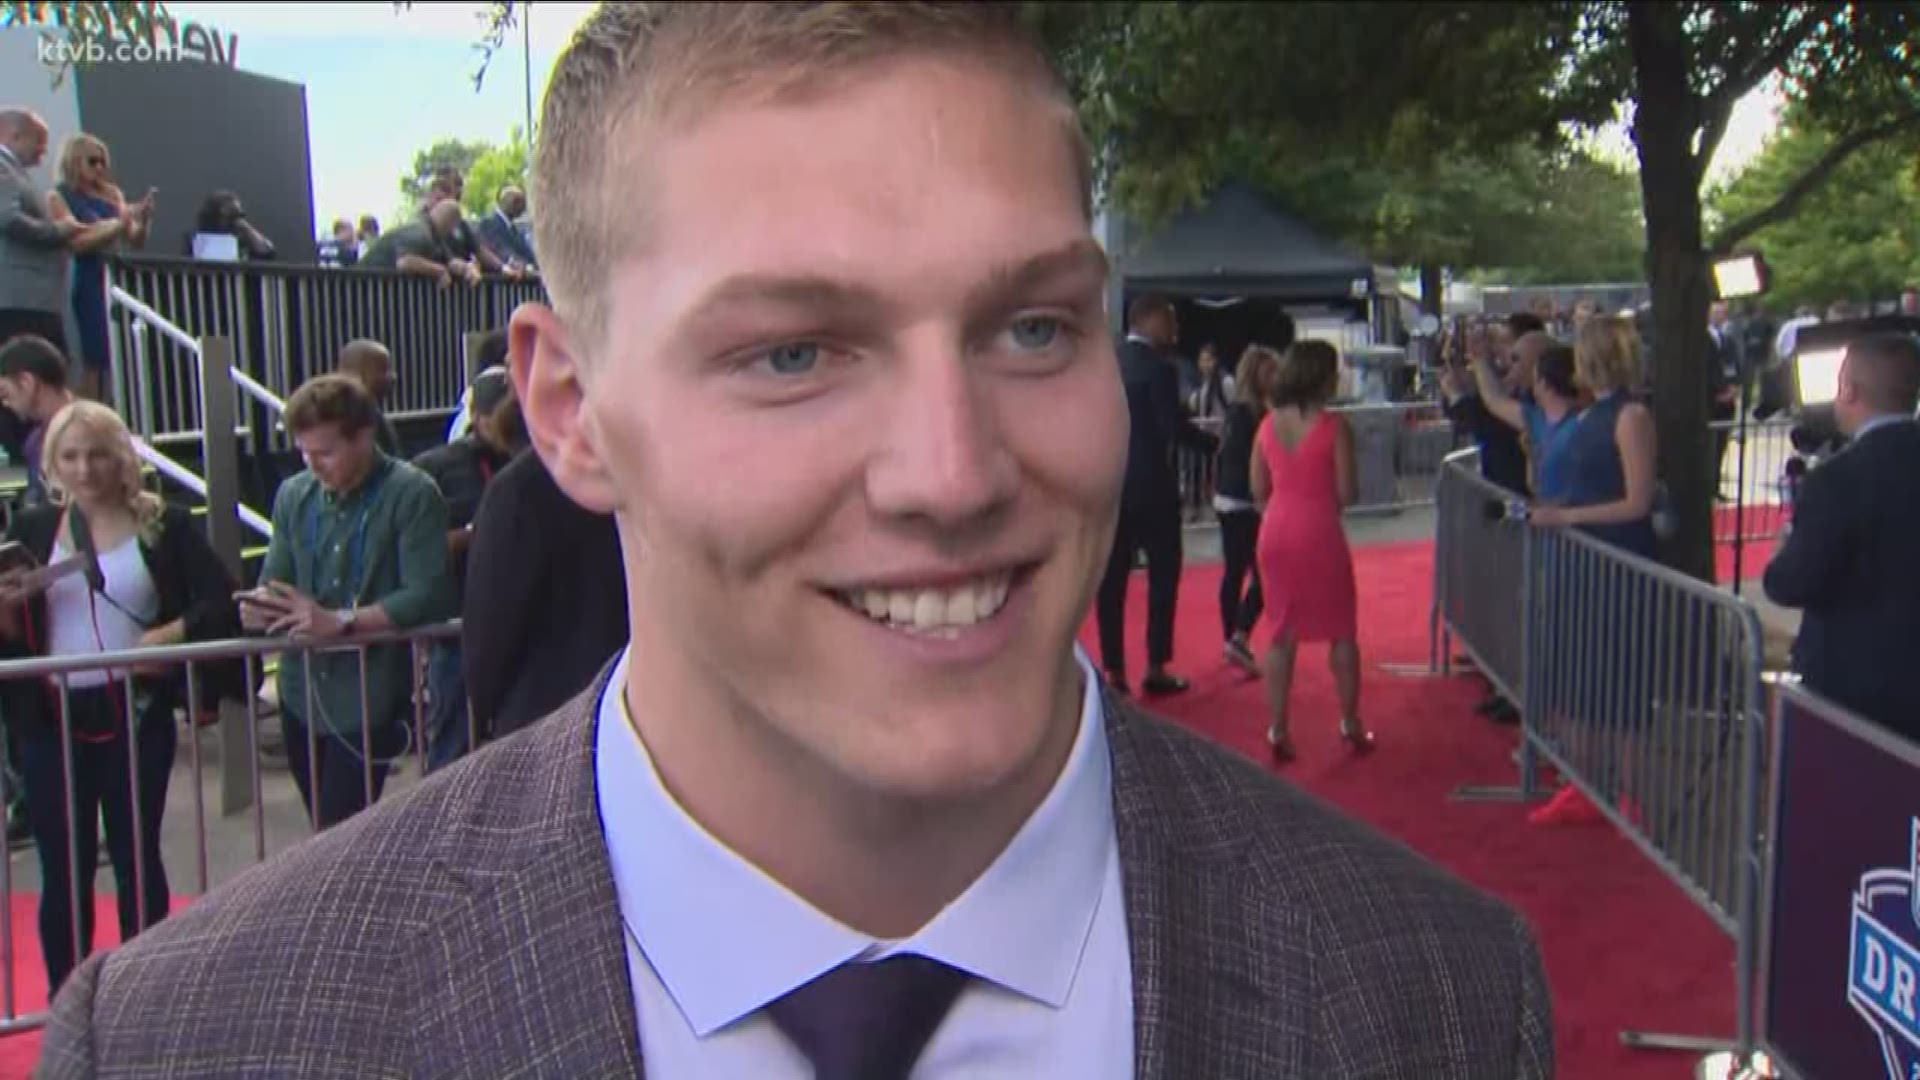 Jay Tust caught up with former Boise State star linebacker Leighton Vander Esch on the red carpet before the 2018 NFL Draft.